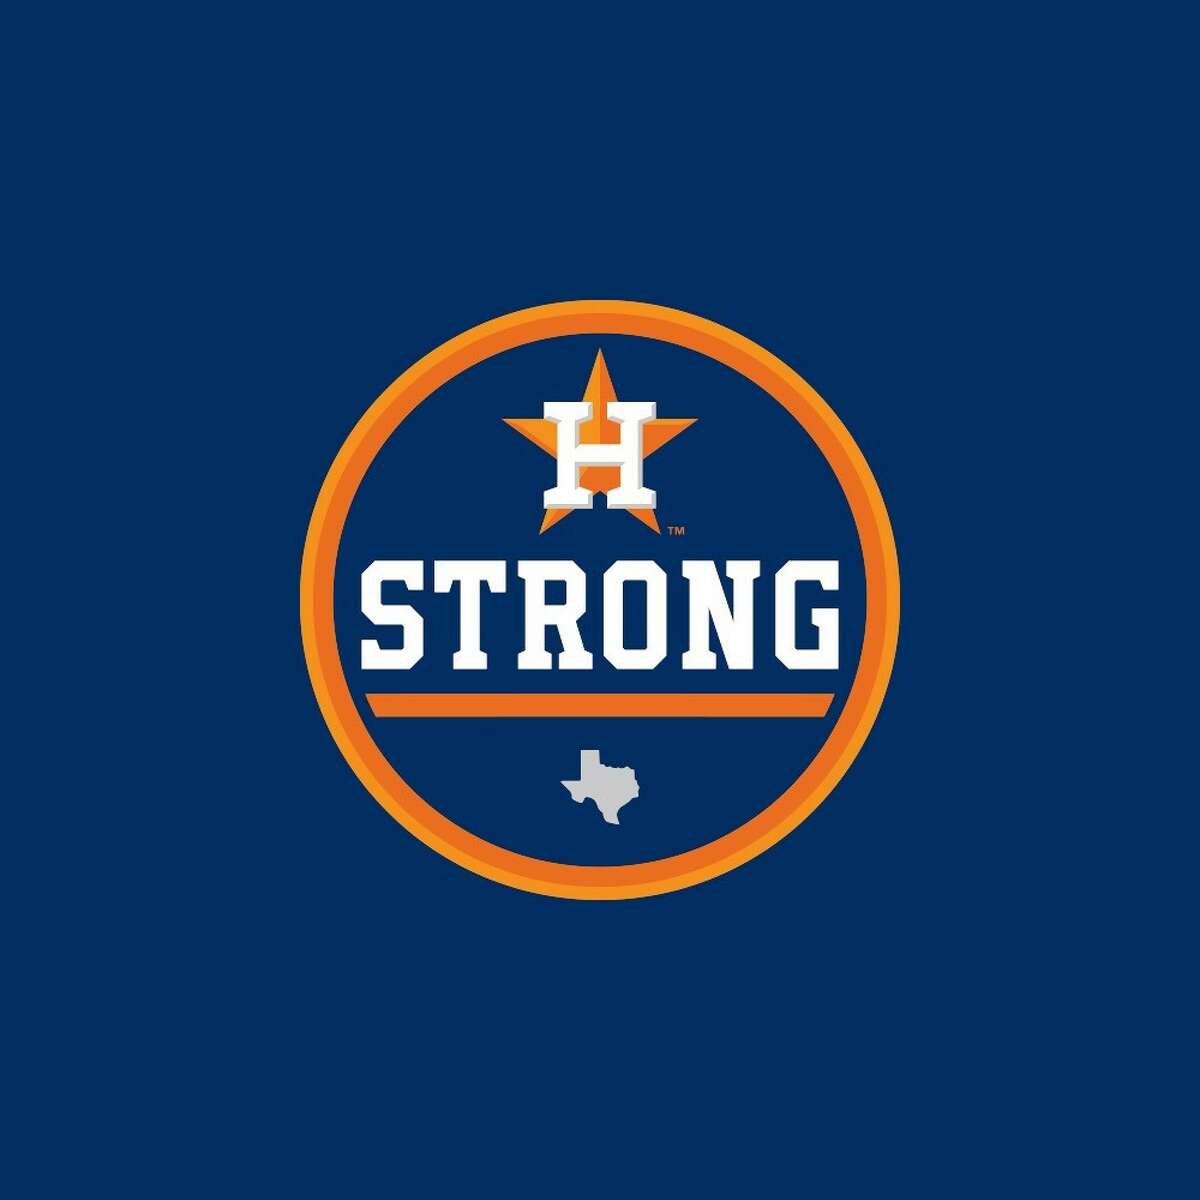 The Astros unveiled a new logo to show support for Houston in the aftermath of Hurricane Harvey. >>>LOGOS WITH LOVE: See how sports teams and t-shirt designers are showing their support for Hurricane Harvey's victims ...